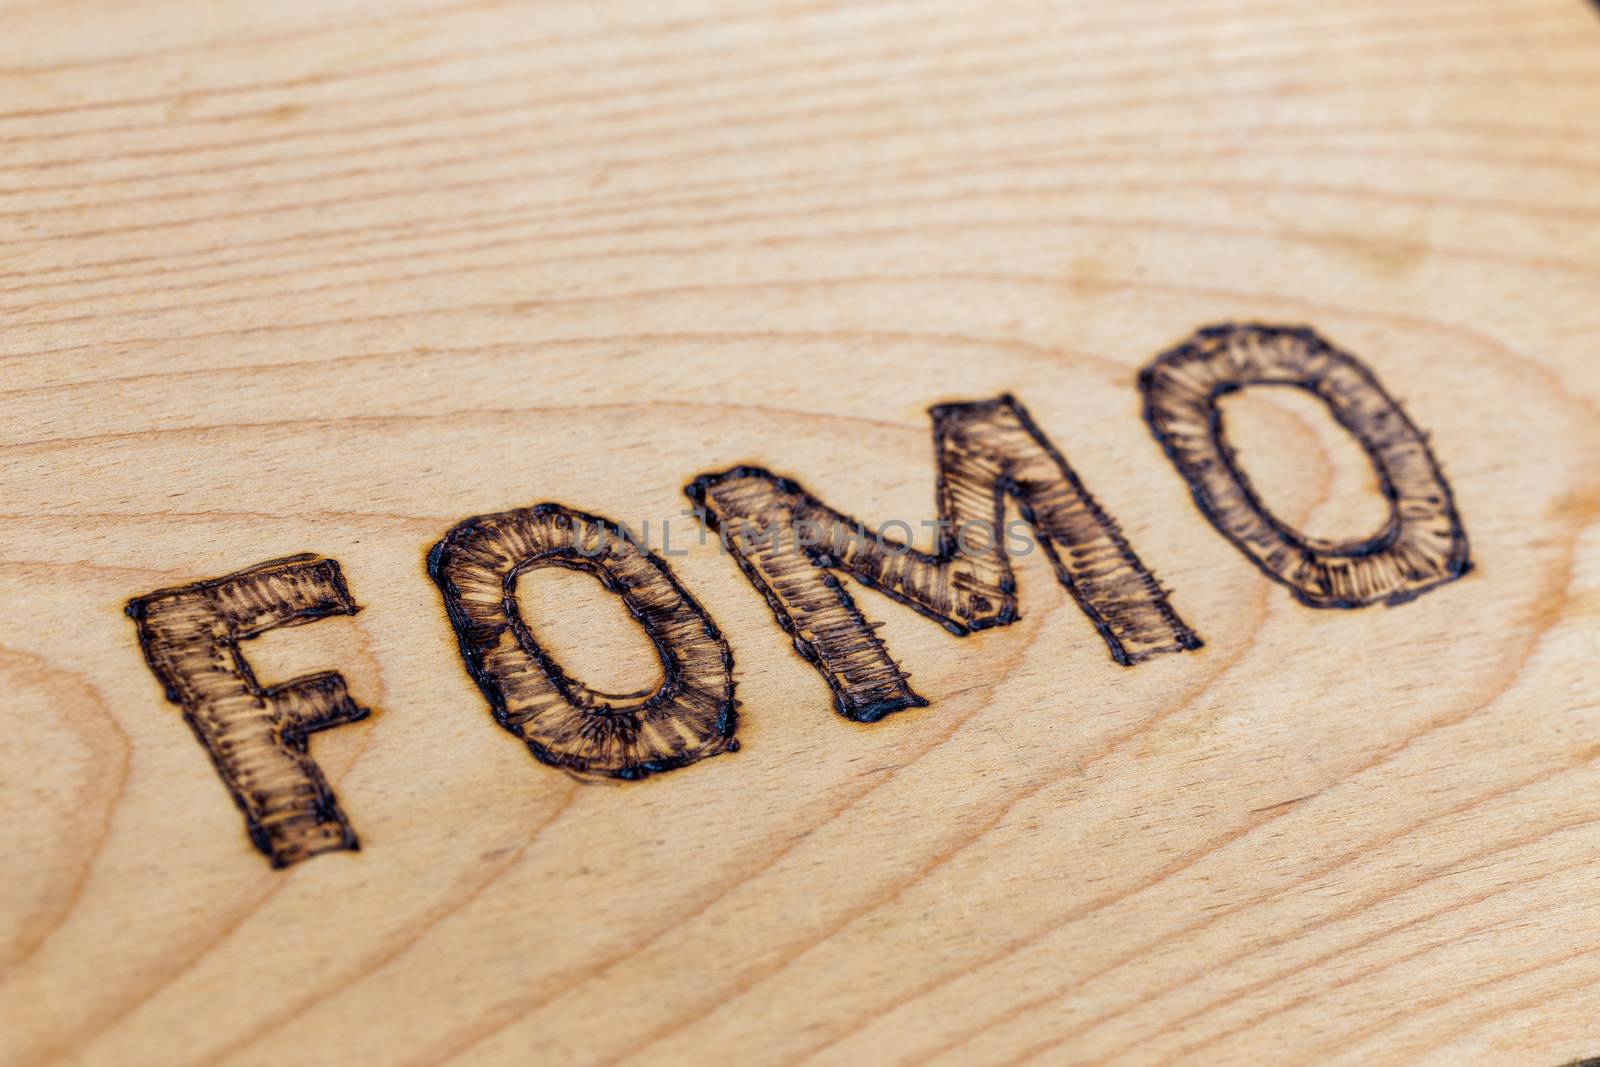 Abbreviation FOMO - fear of missing out - burnt by hand on flat wooden surface. Diagonal close-up view with selective focus.